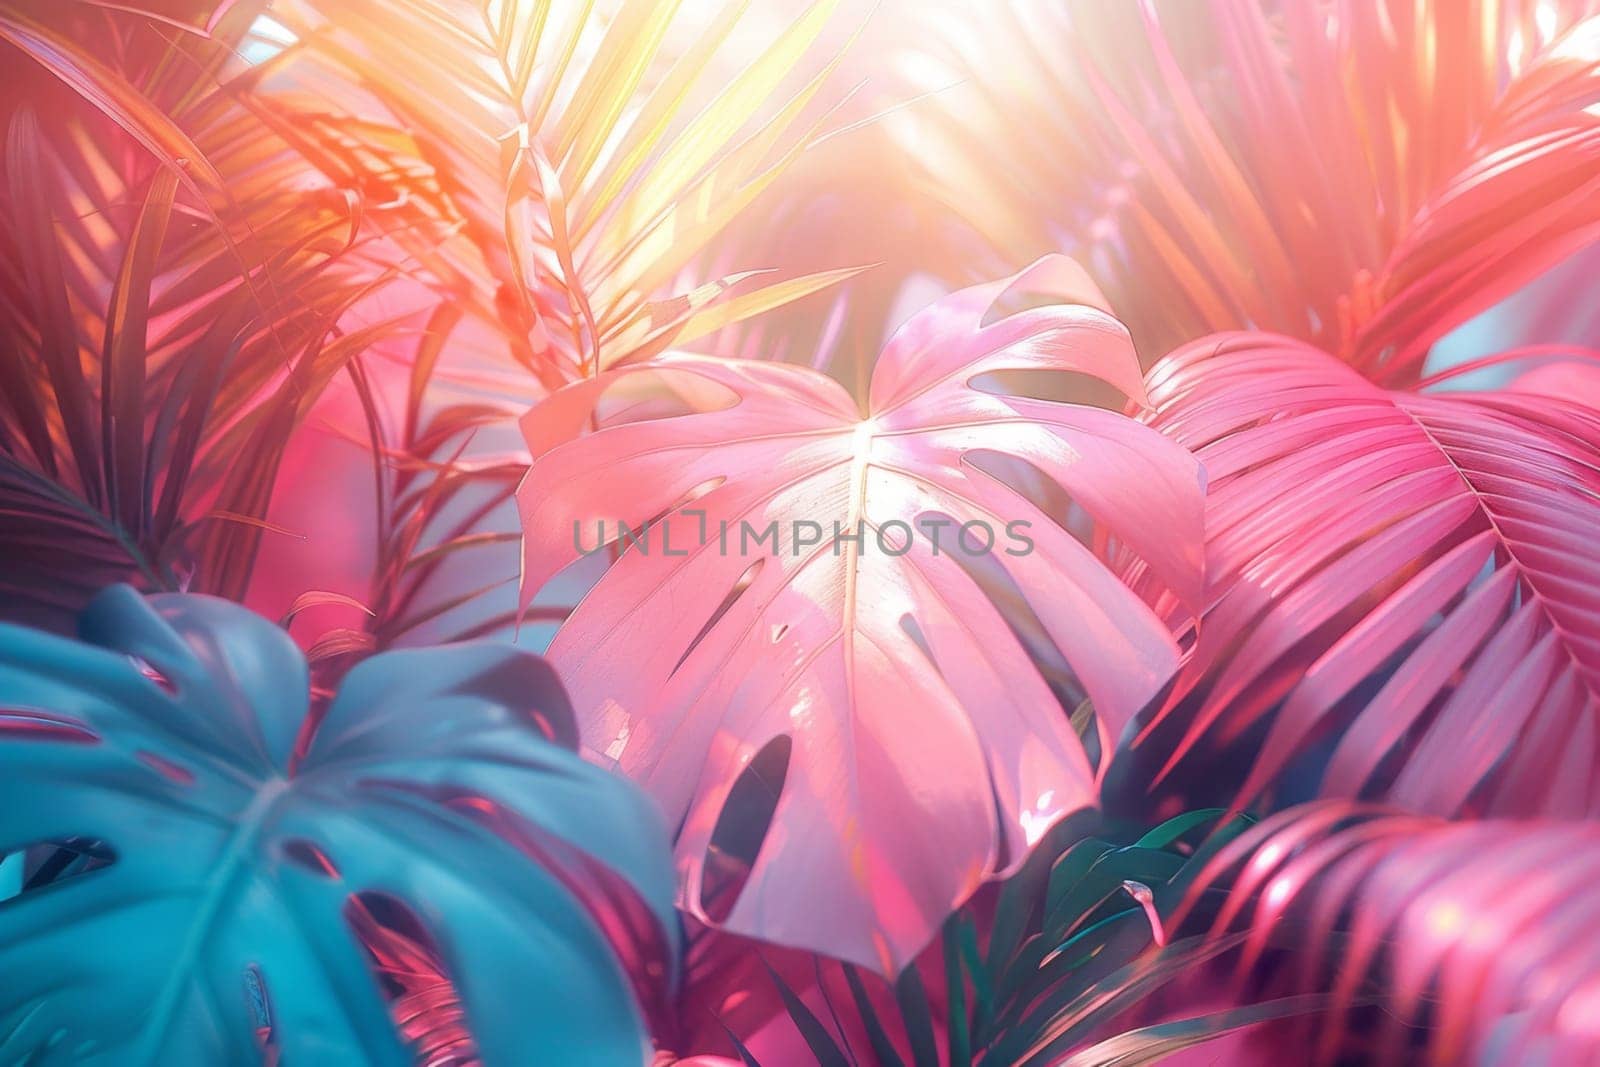 Abstract background with palm leaves.